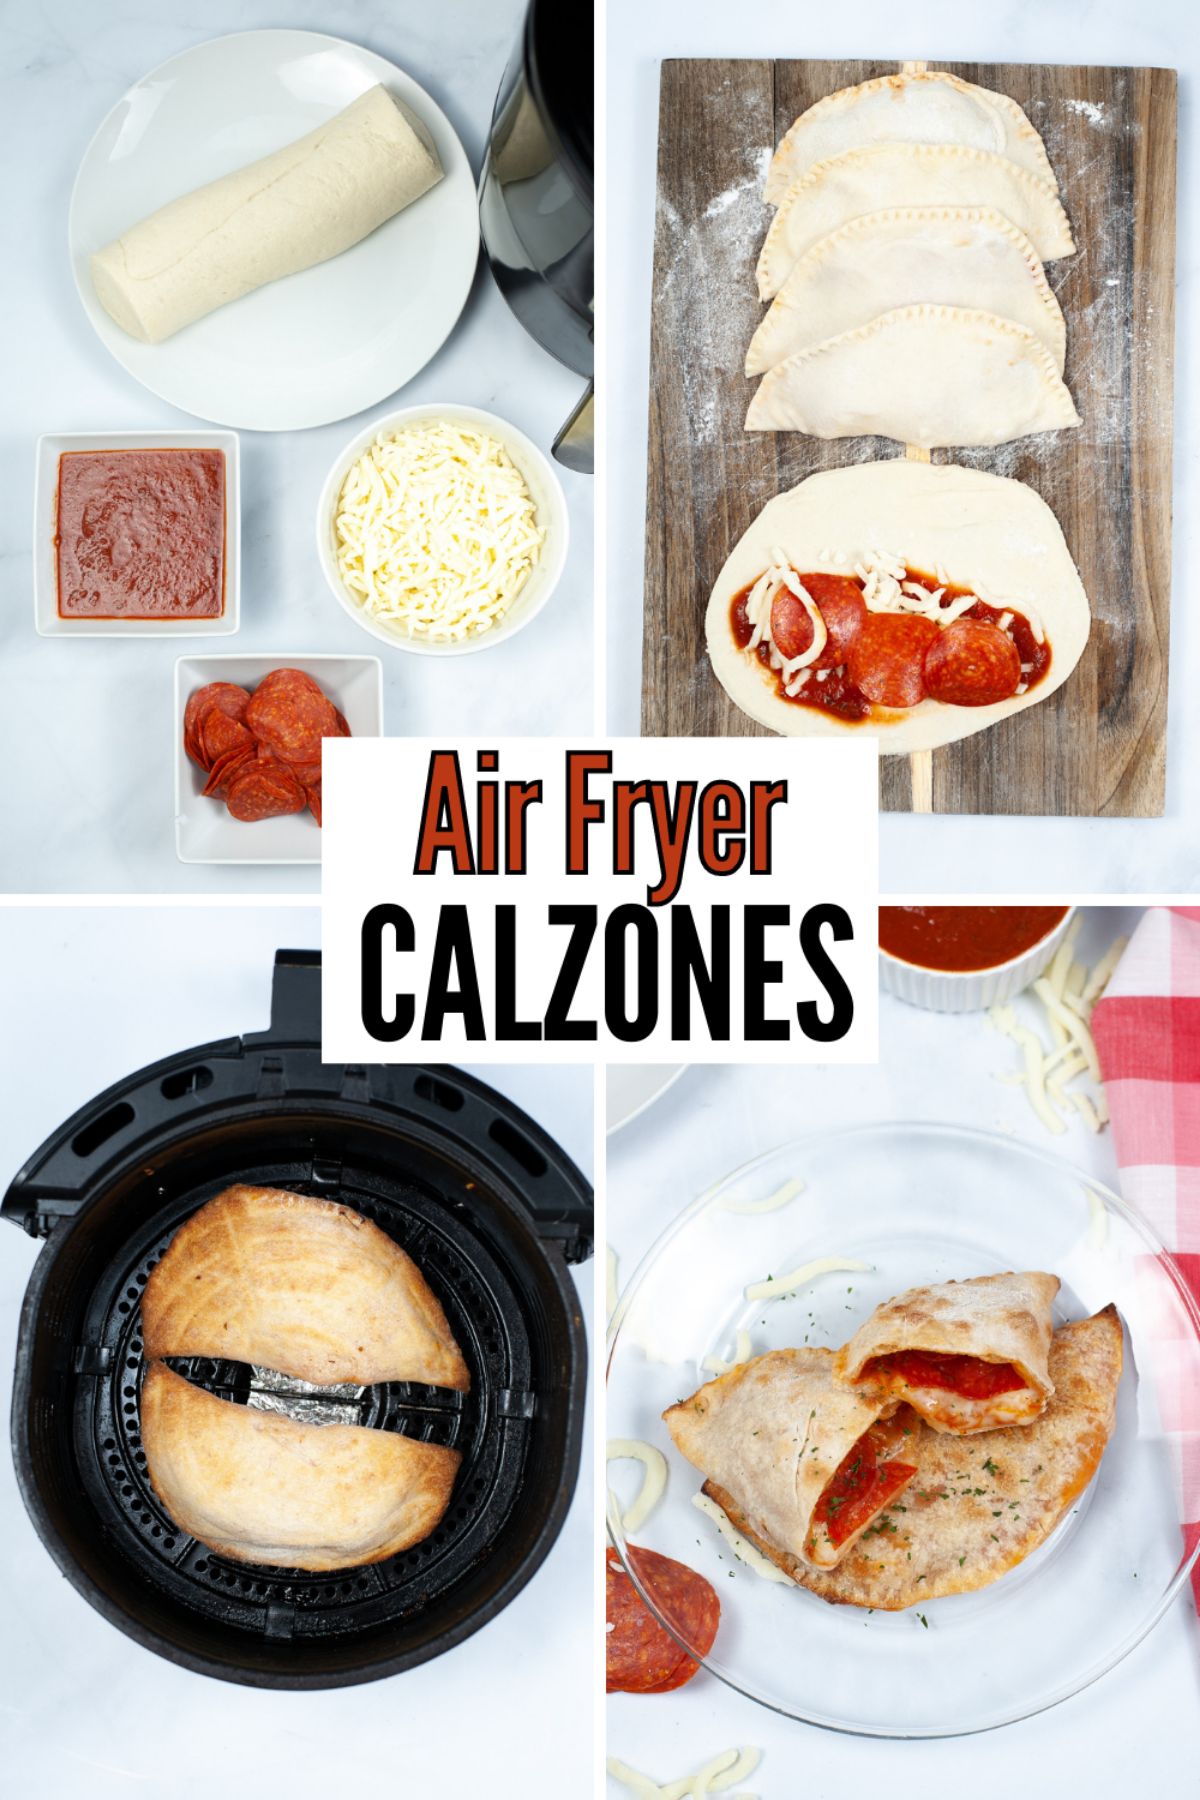 Air Fryer Calzone Recipe is a savory bread pocket that is filled with gooey cheese and your favorite pizza topping. It's easy to make! #airfryer #calzone #calzonerecipe #recipe via @wondermomwannab